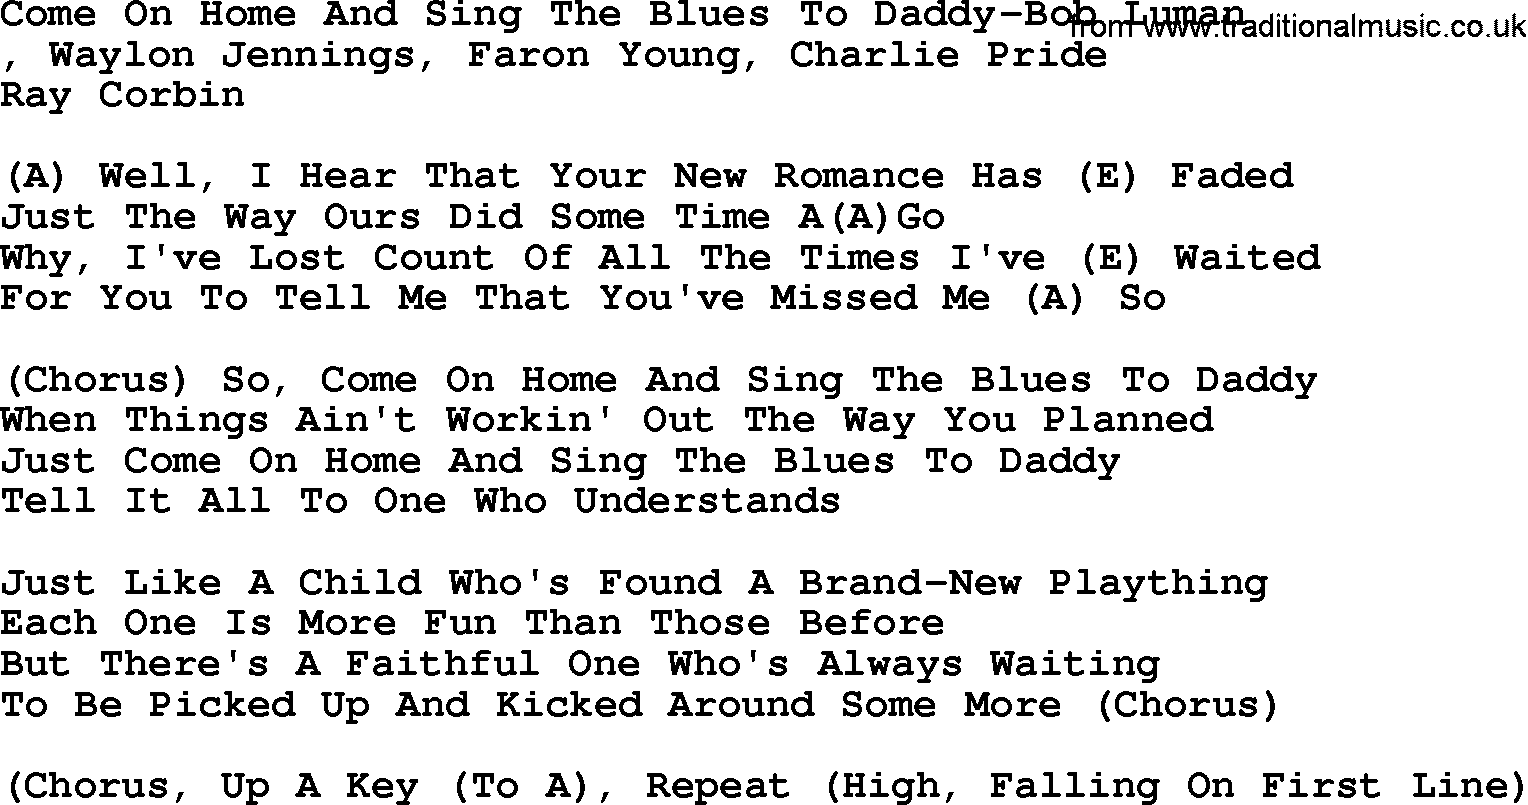 Country music song: Come On Home And Sing The Blues To Daddy-Bob Luman lyrics and chords